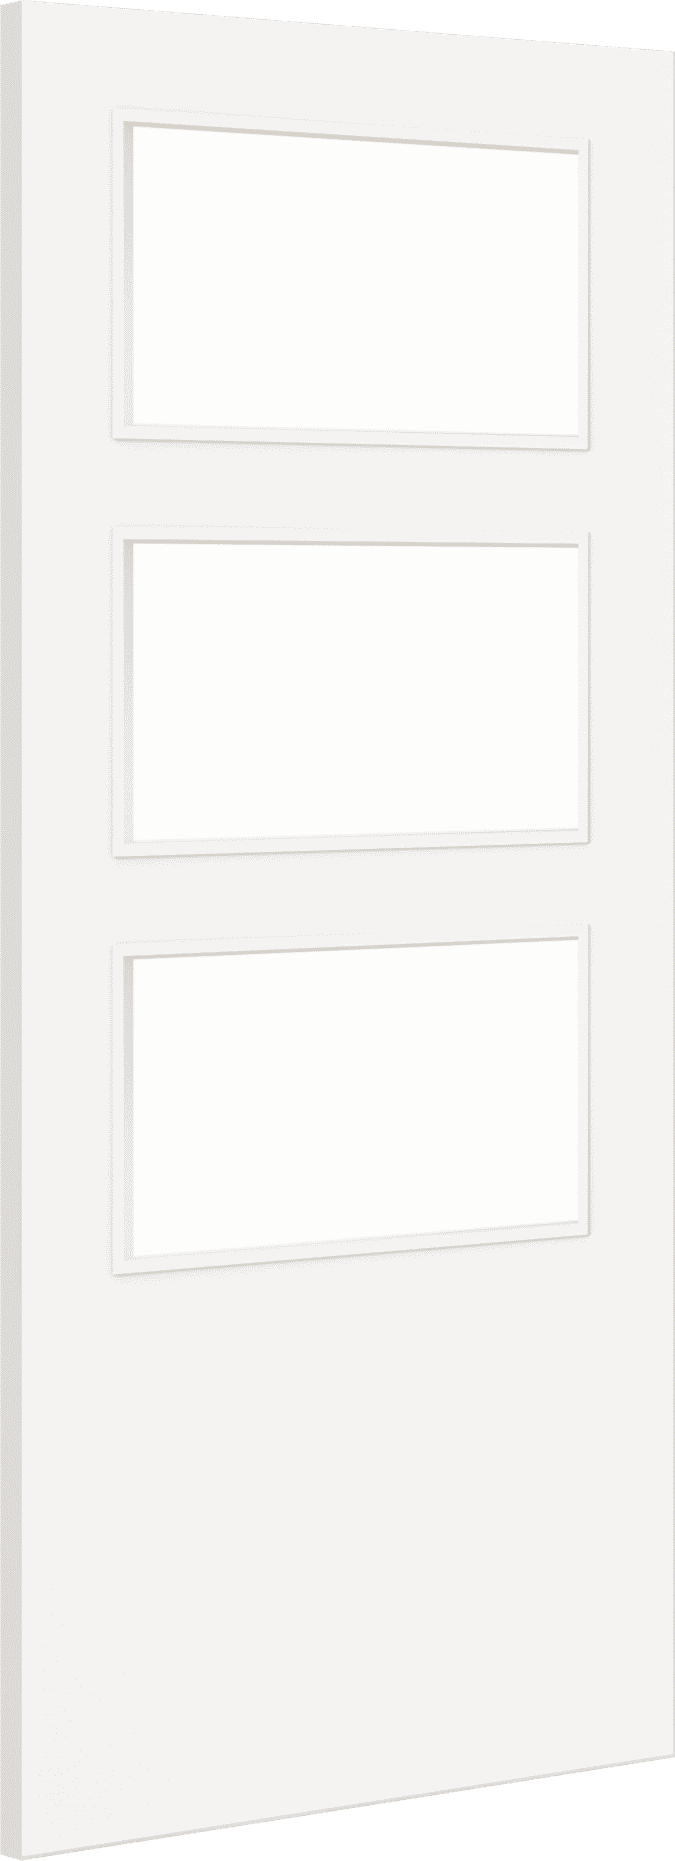 2040mm x 926mm x 44mm Architectural Paint Grade White 03 Clear Glazed Fire Door Blank